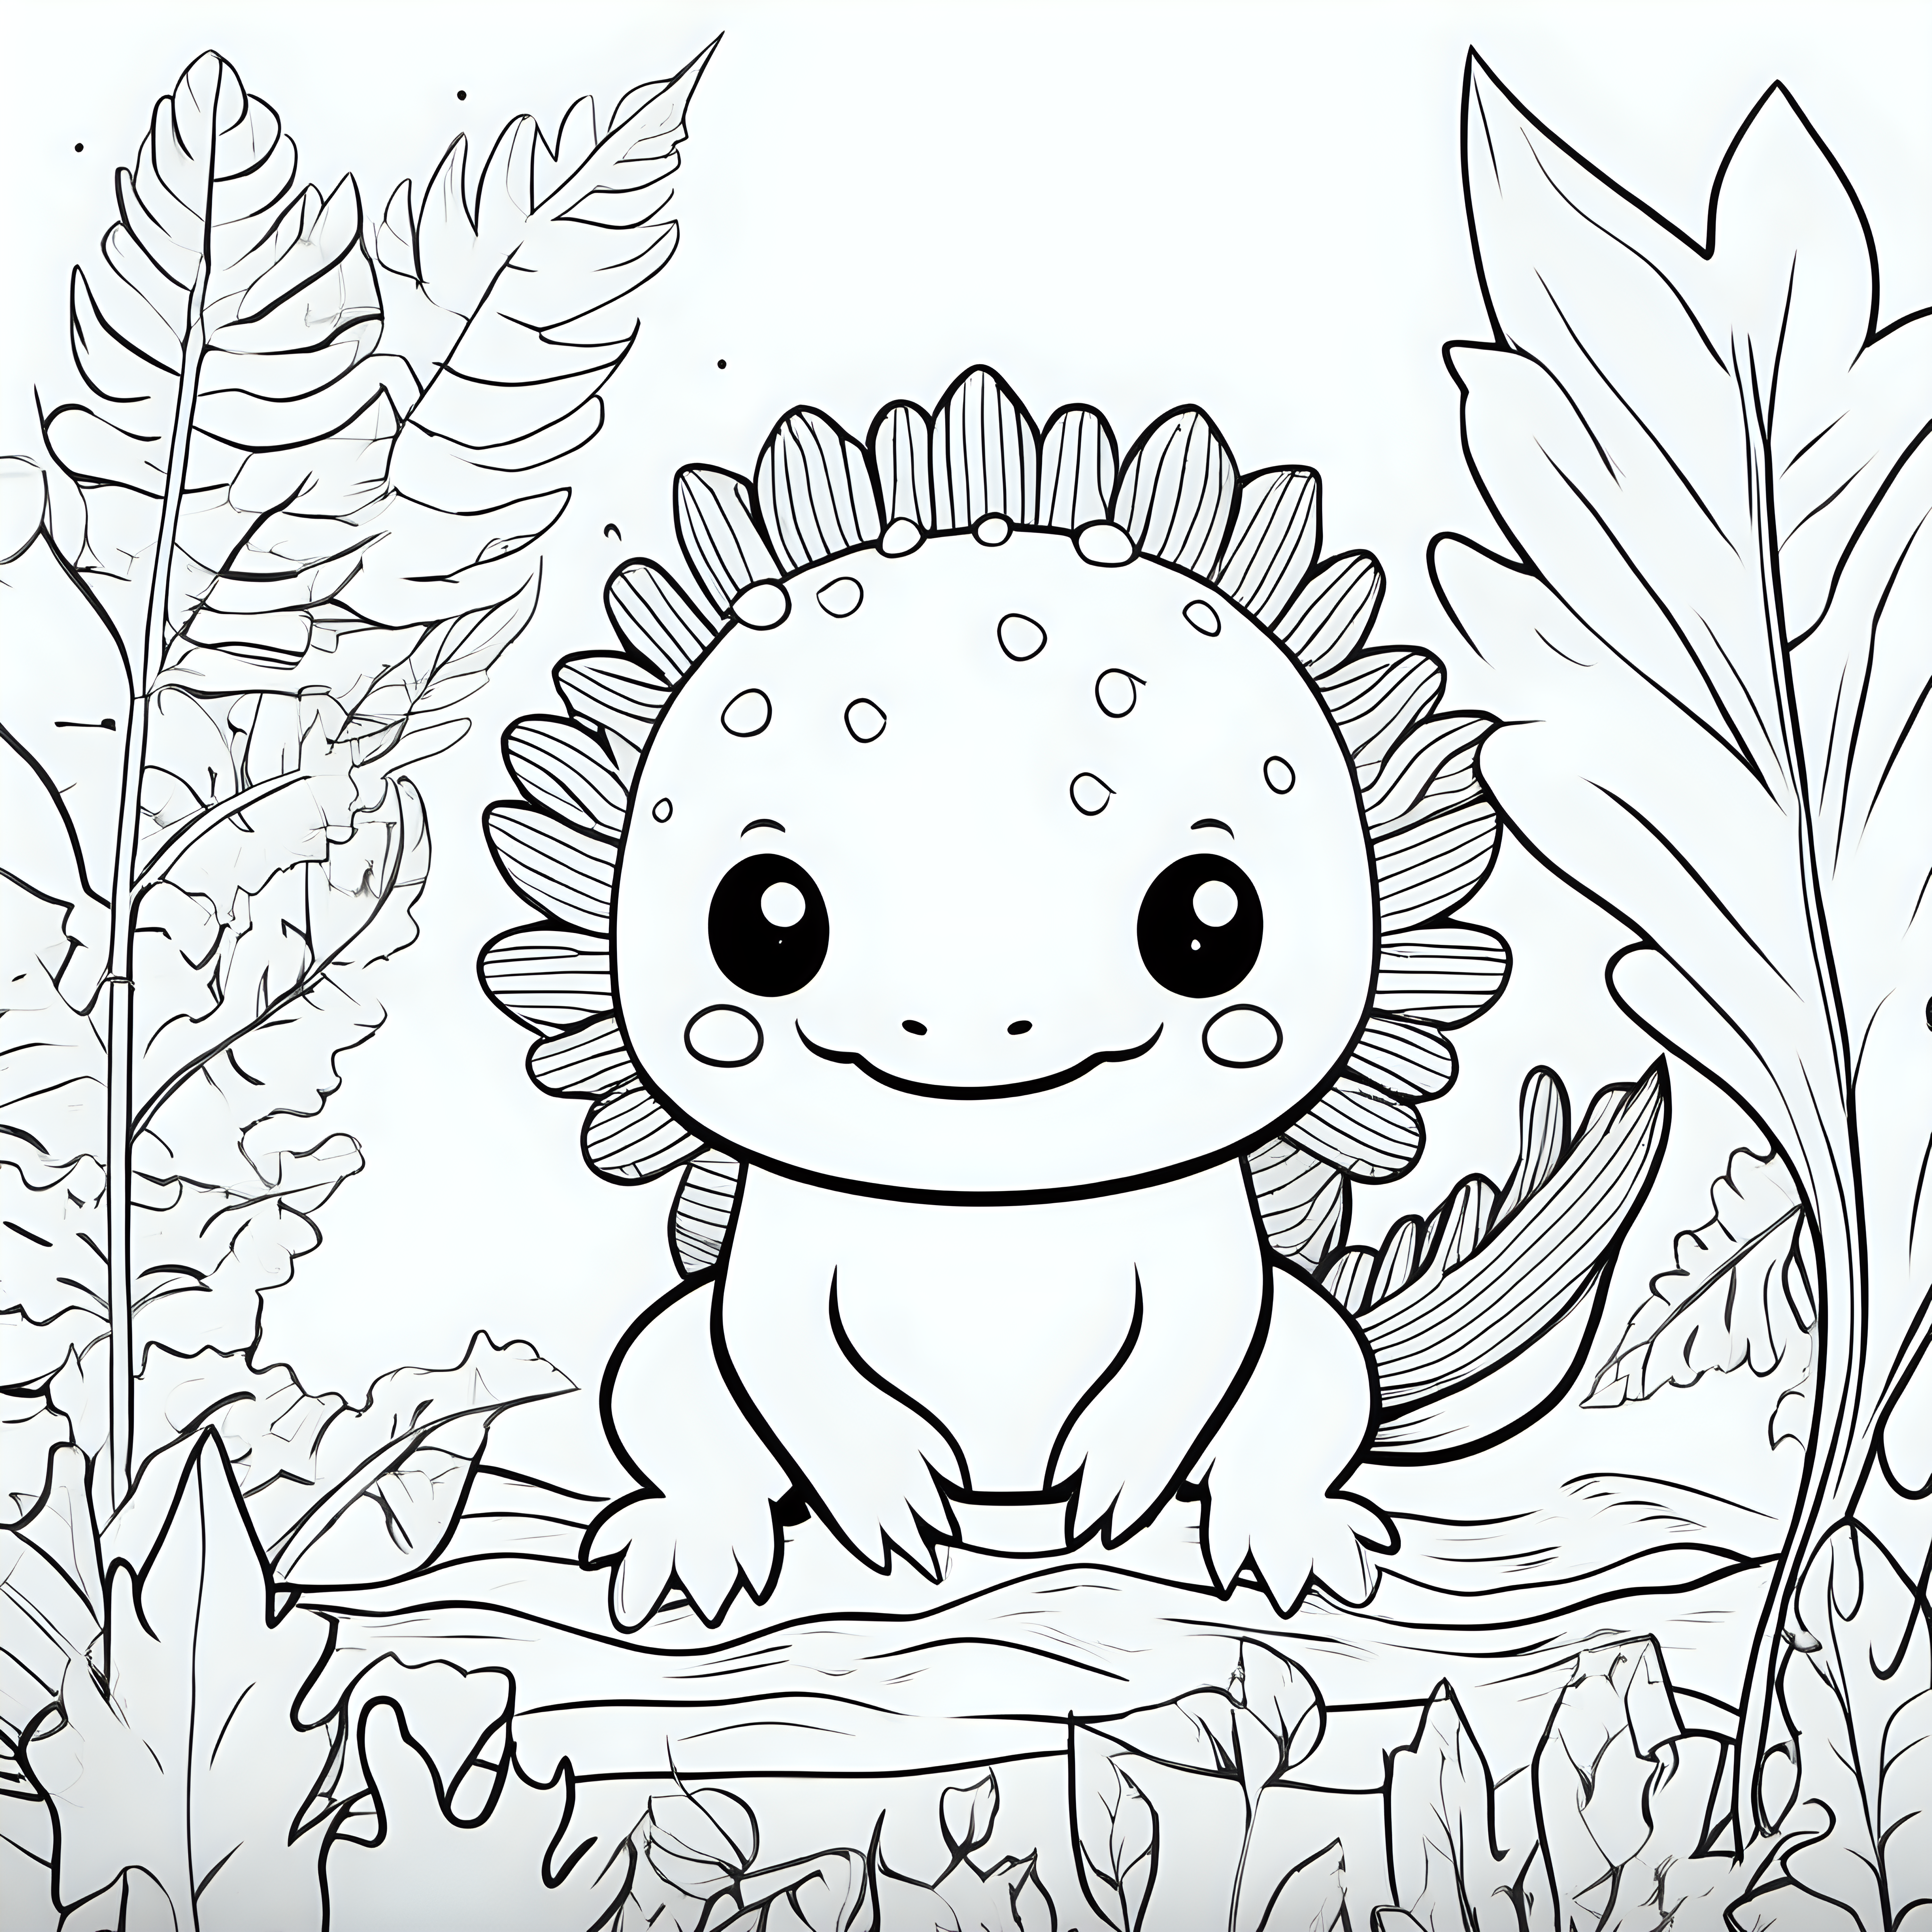 draw a colorful book cover for a coloring book for kids with cute animals like Axolotl with a nice background with leafs half outline and half with color